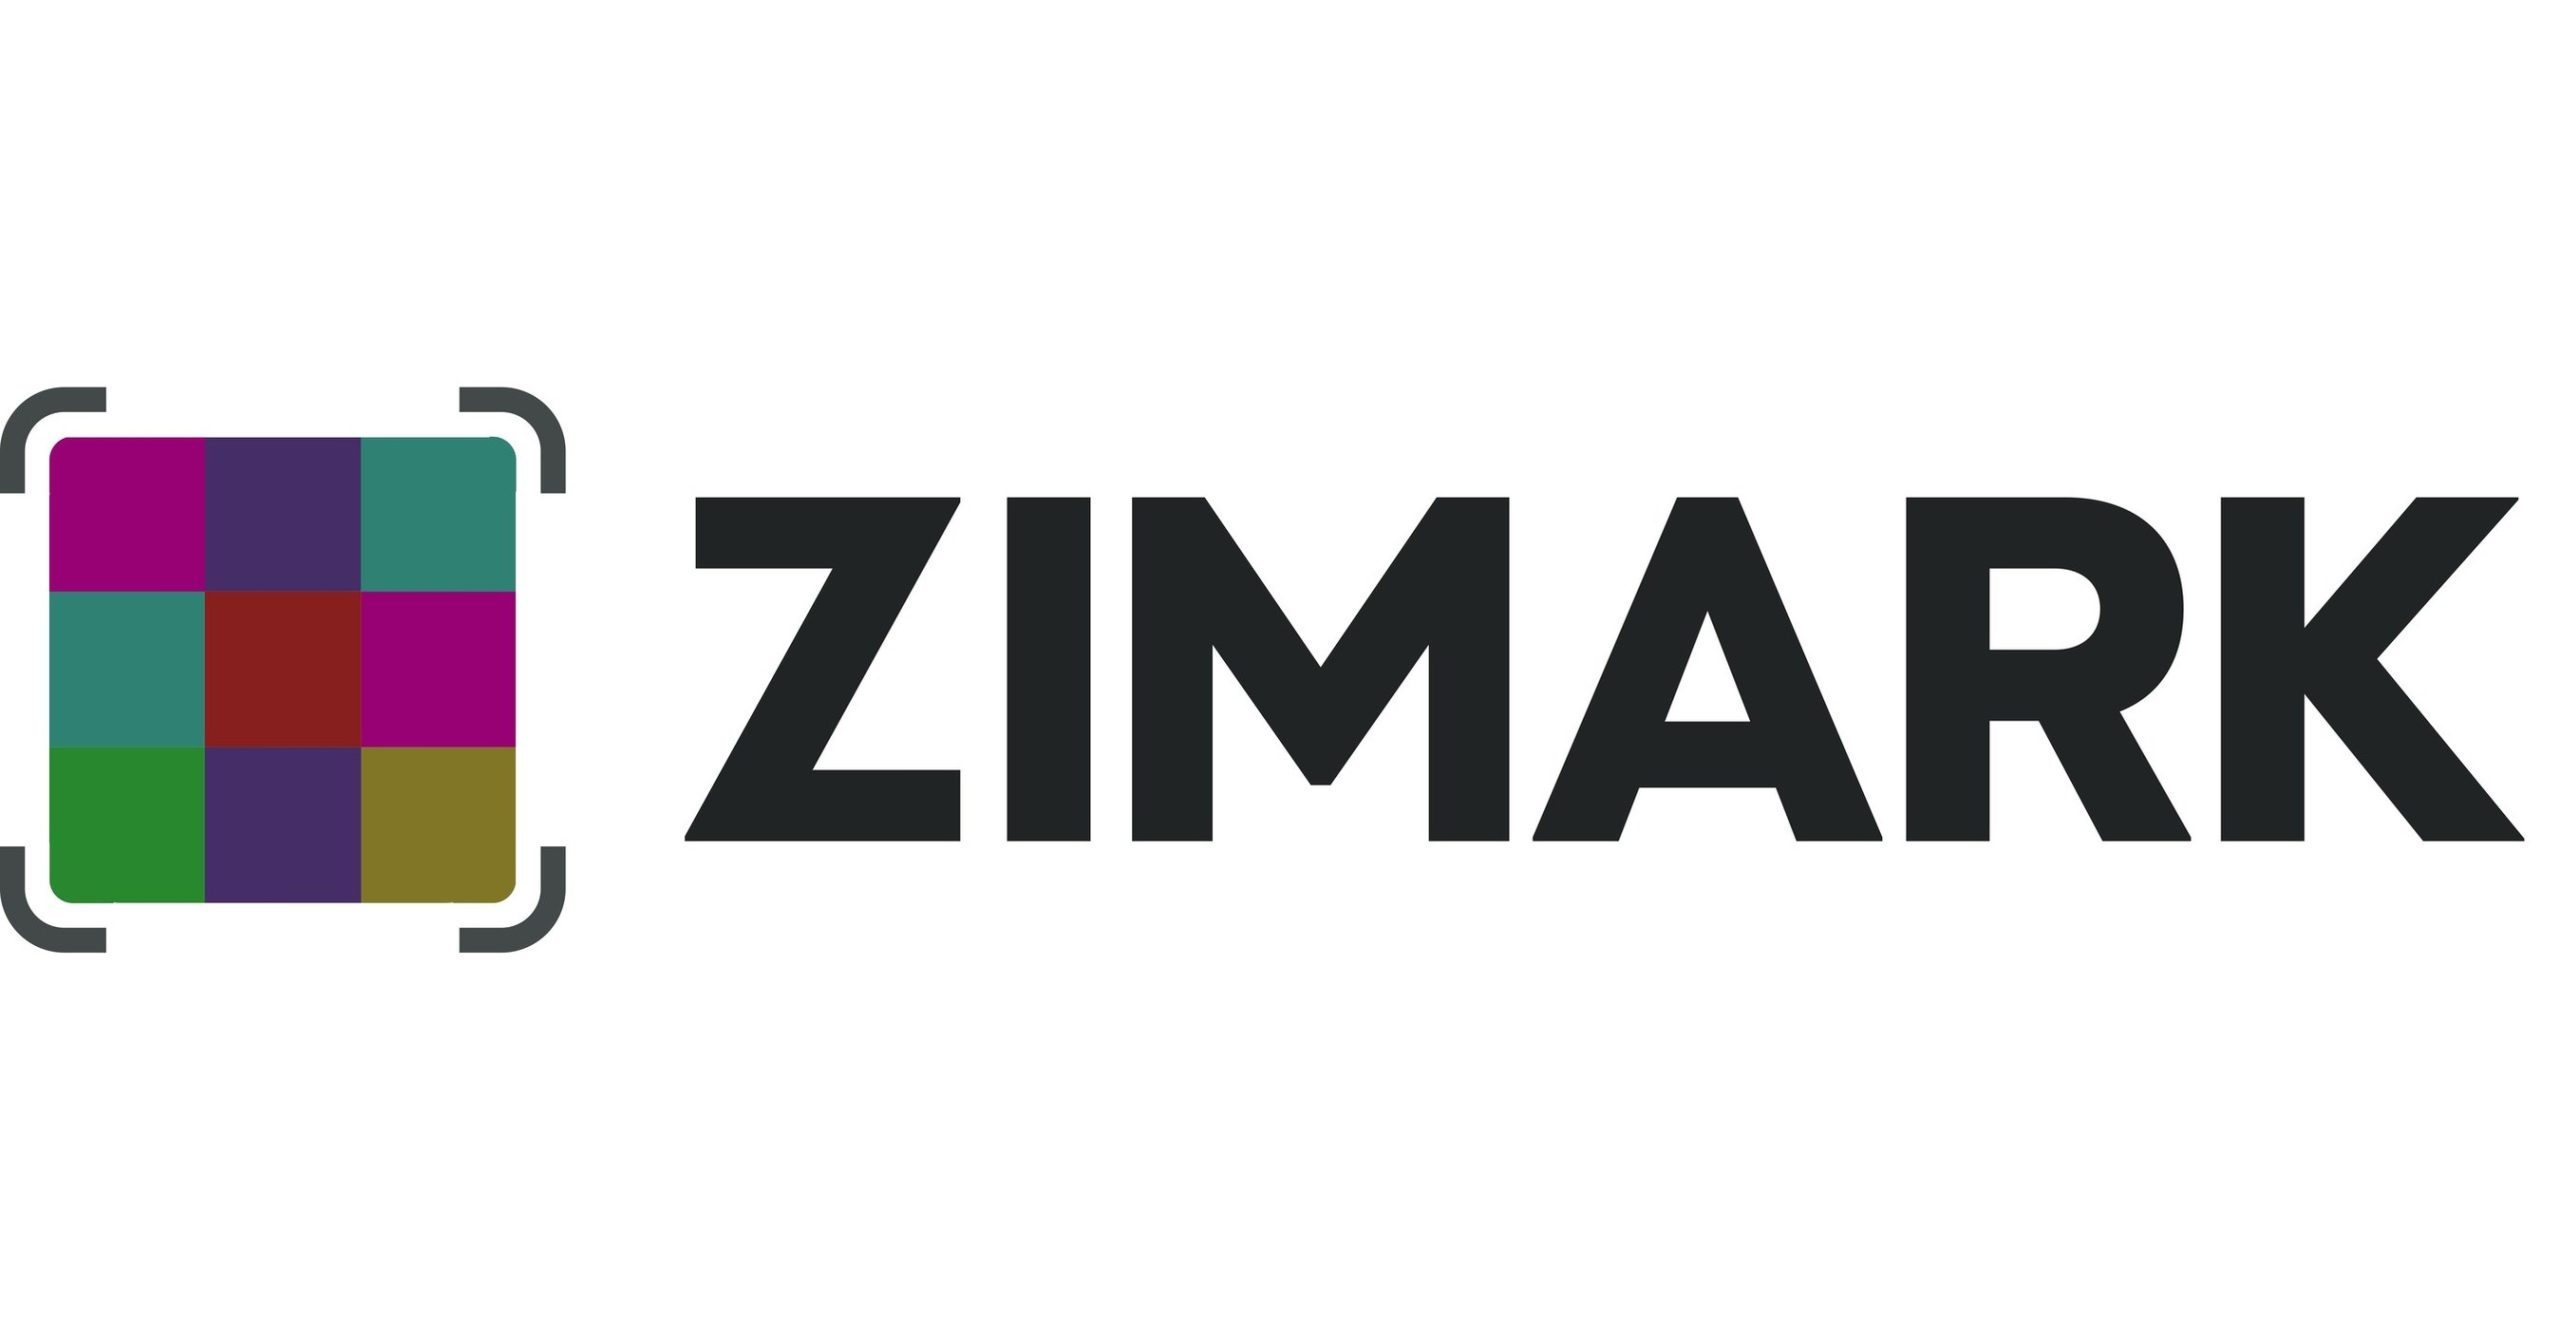 ZIM Integrated Shipping Services Ltd. Logo